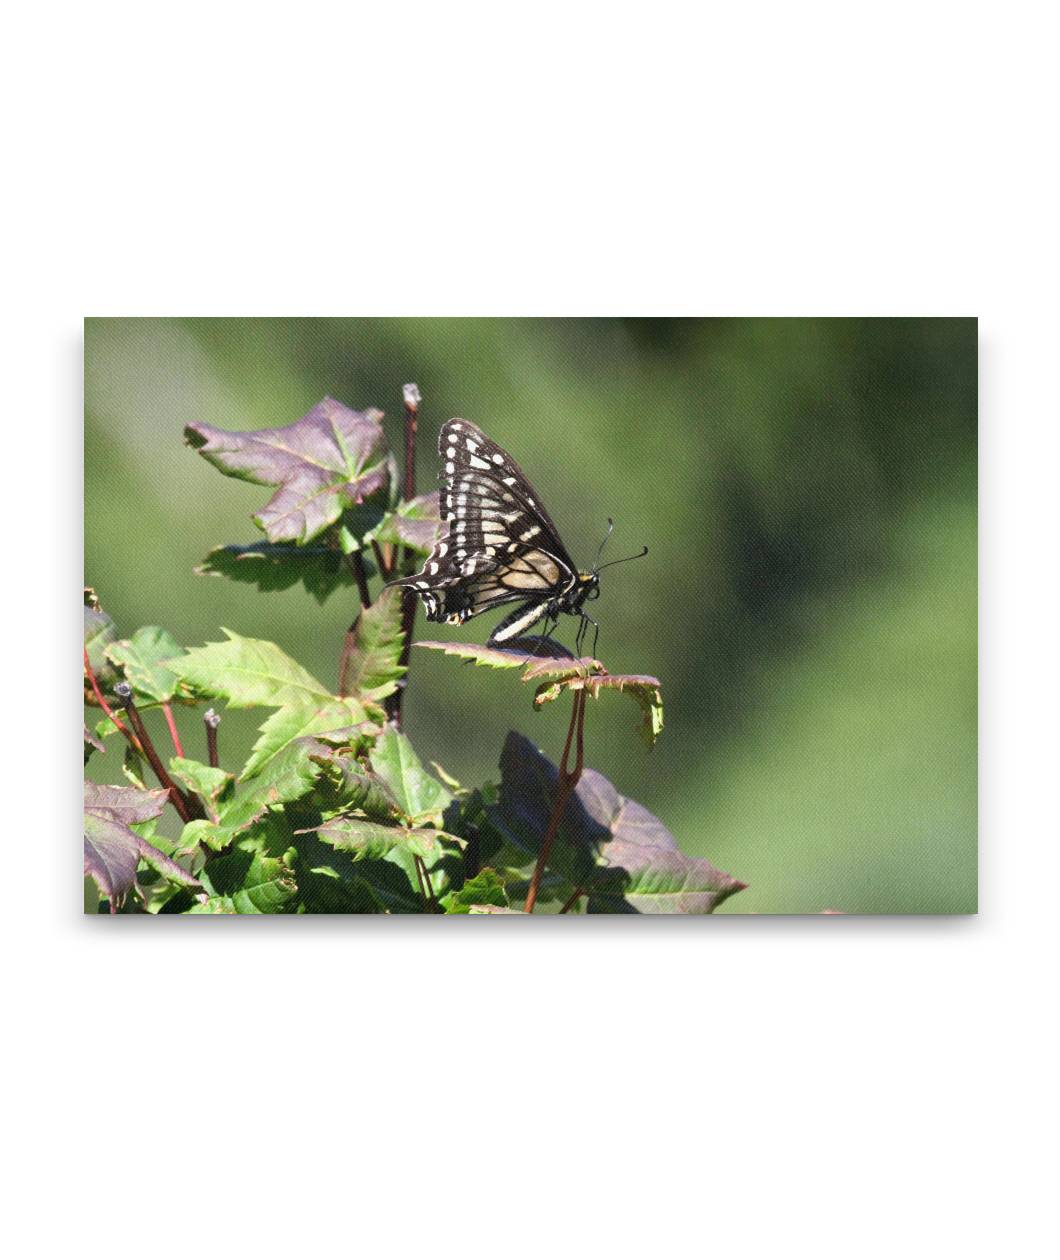 Swallowtail Butterfly on Vine Maple, Carpenter Mountain, HJ Andrews Forest, Oregon, USA